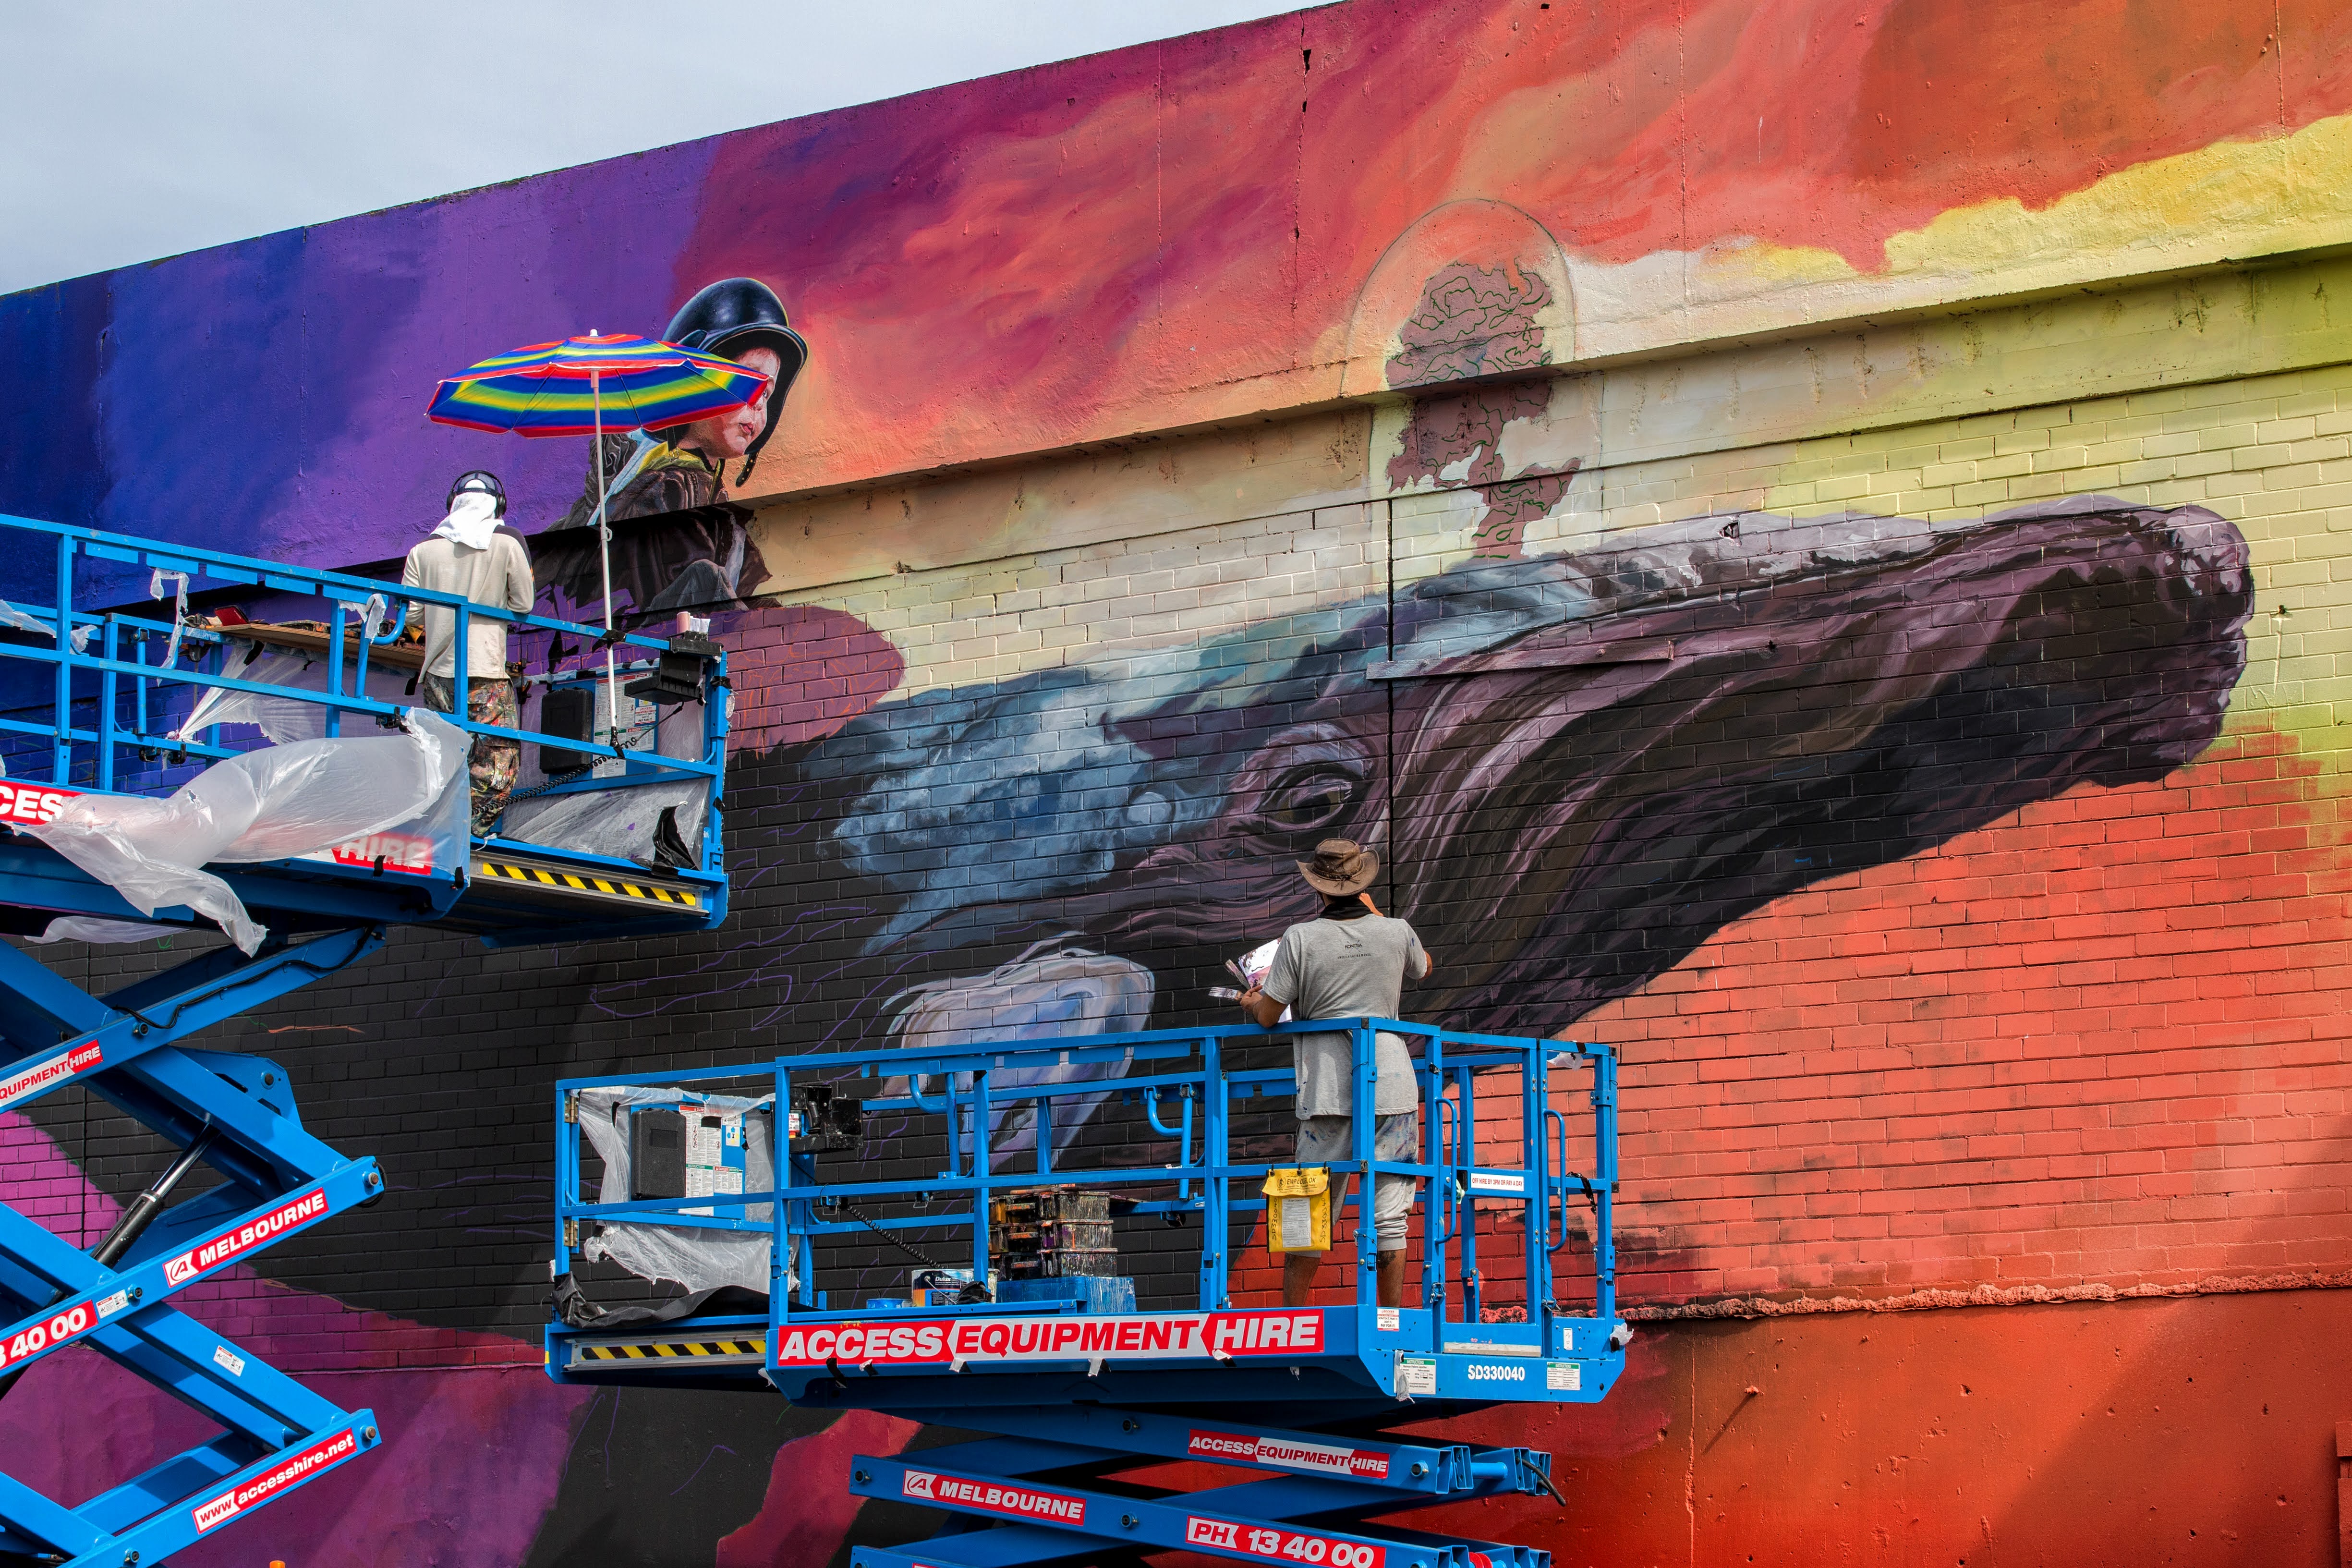 Frankston get ready for an avalanche of colour - Big Picture Fest is back